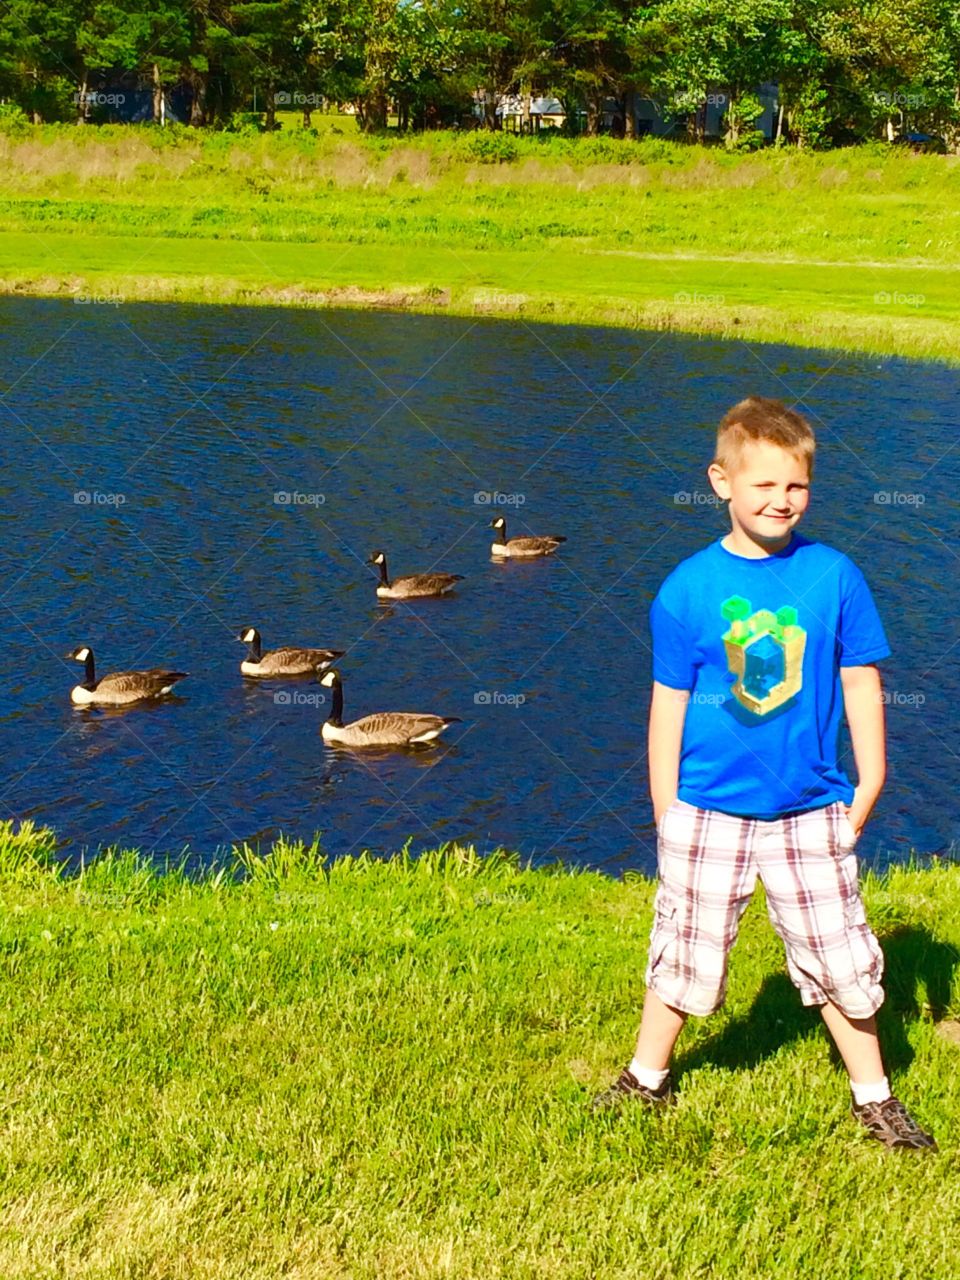 Little cousin at the farm . Awesome geese background 